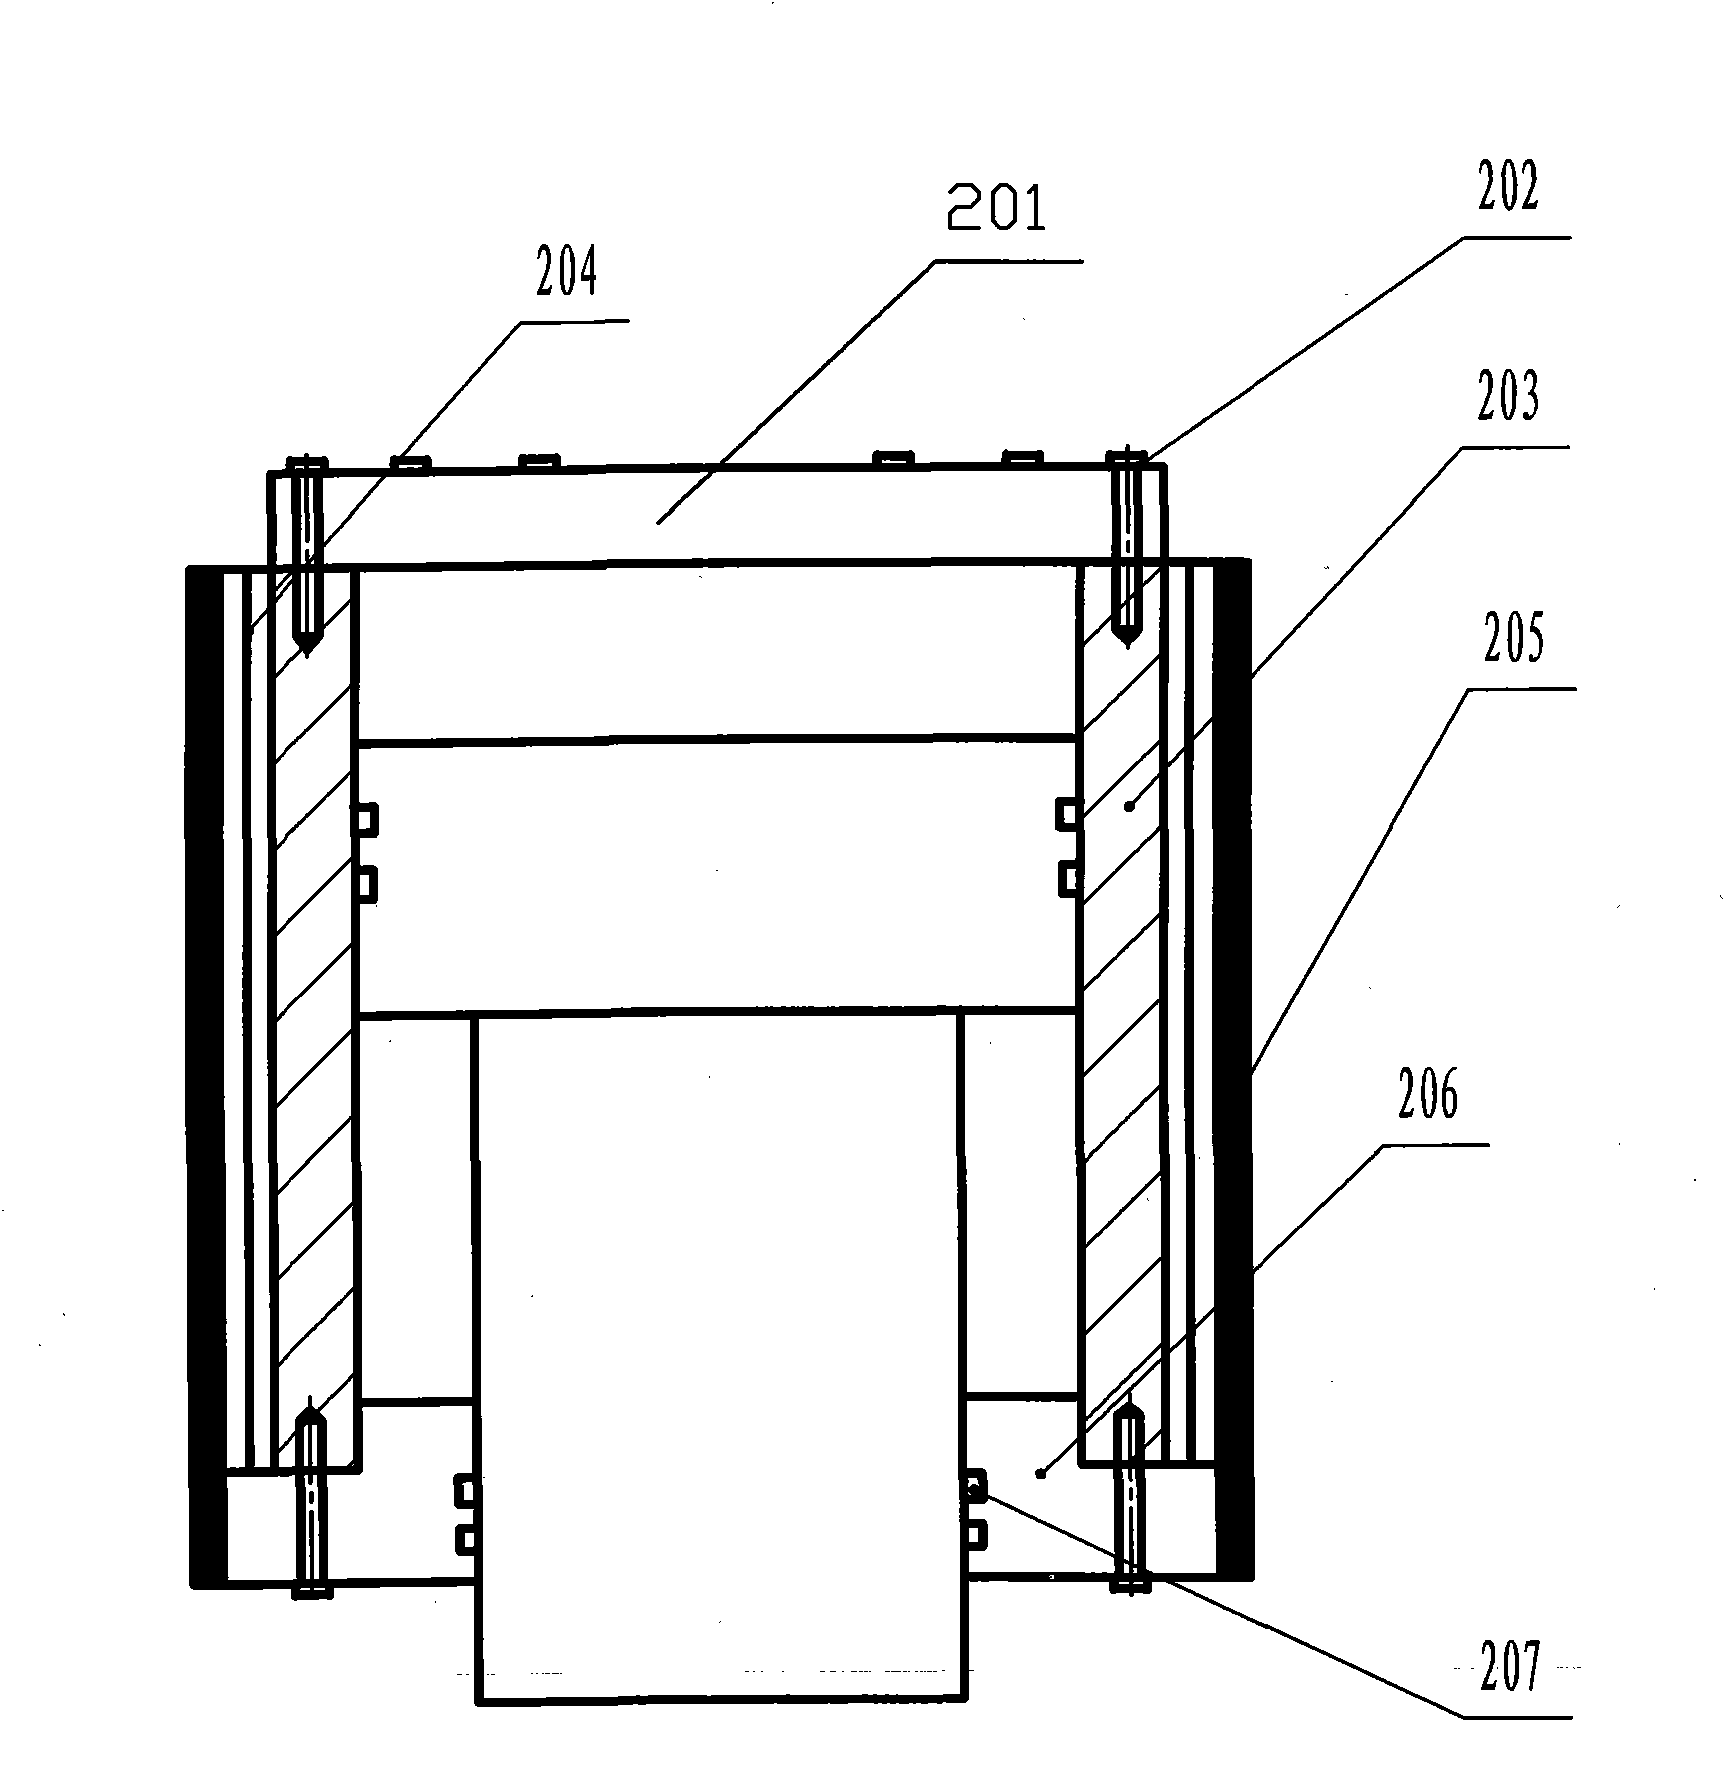 Combined rectangular oil cylinder